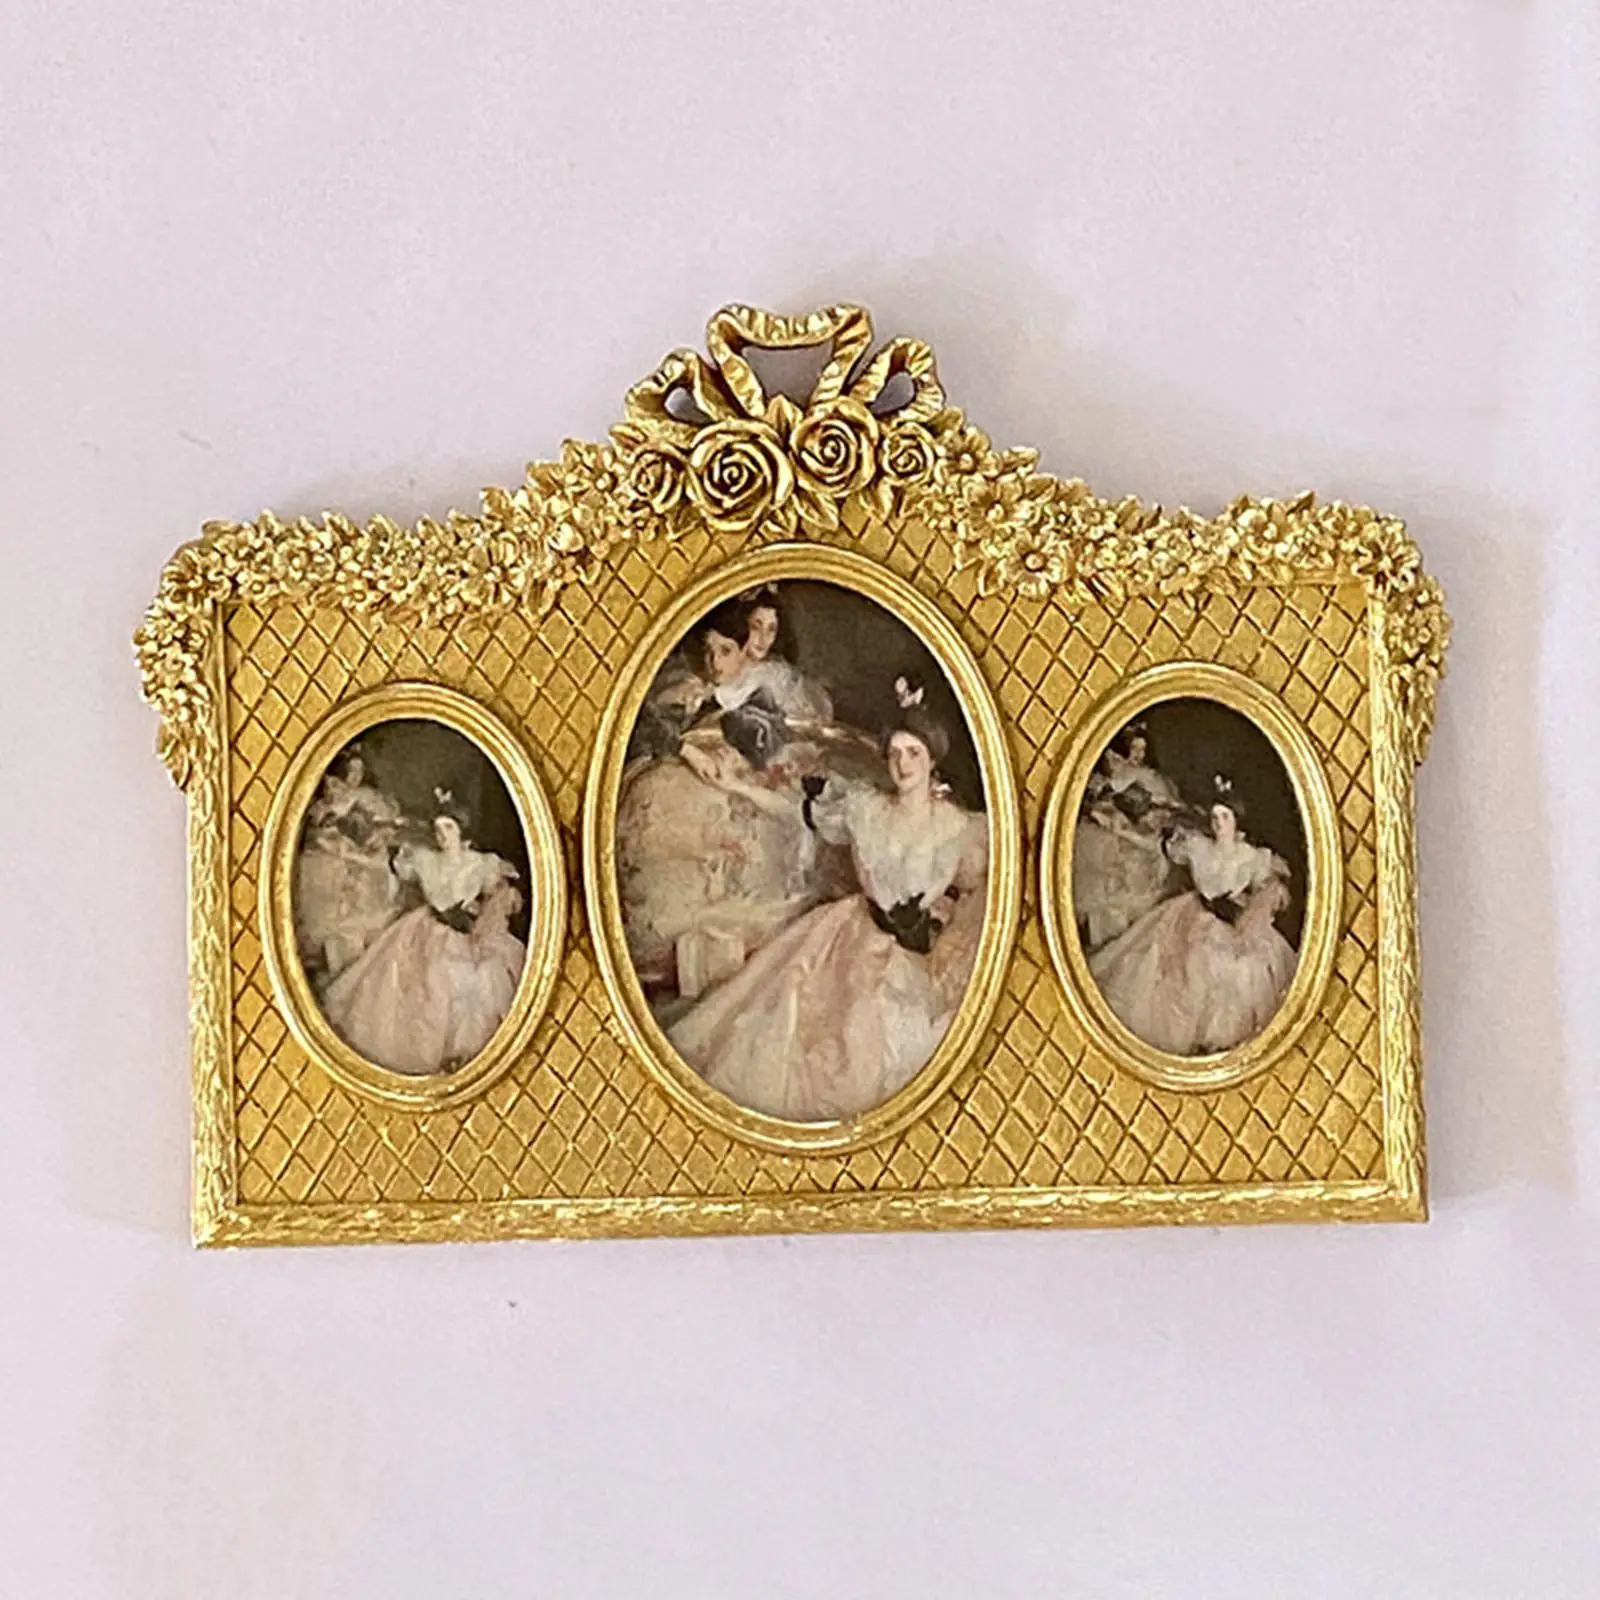 Home Decoration Vintage Picture Frame Retro Style Gift Wall Hanging Ornate Photo Display Frame for Tabletop Office Bathroom